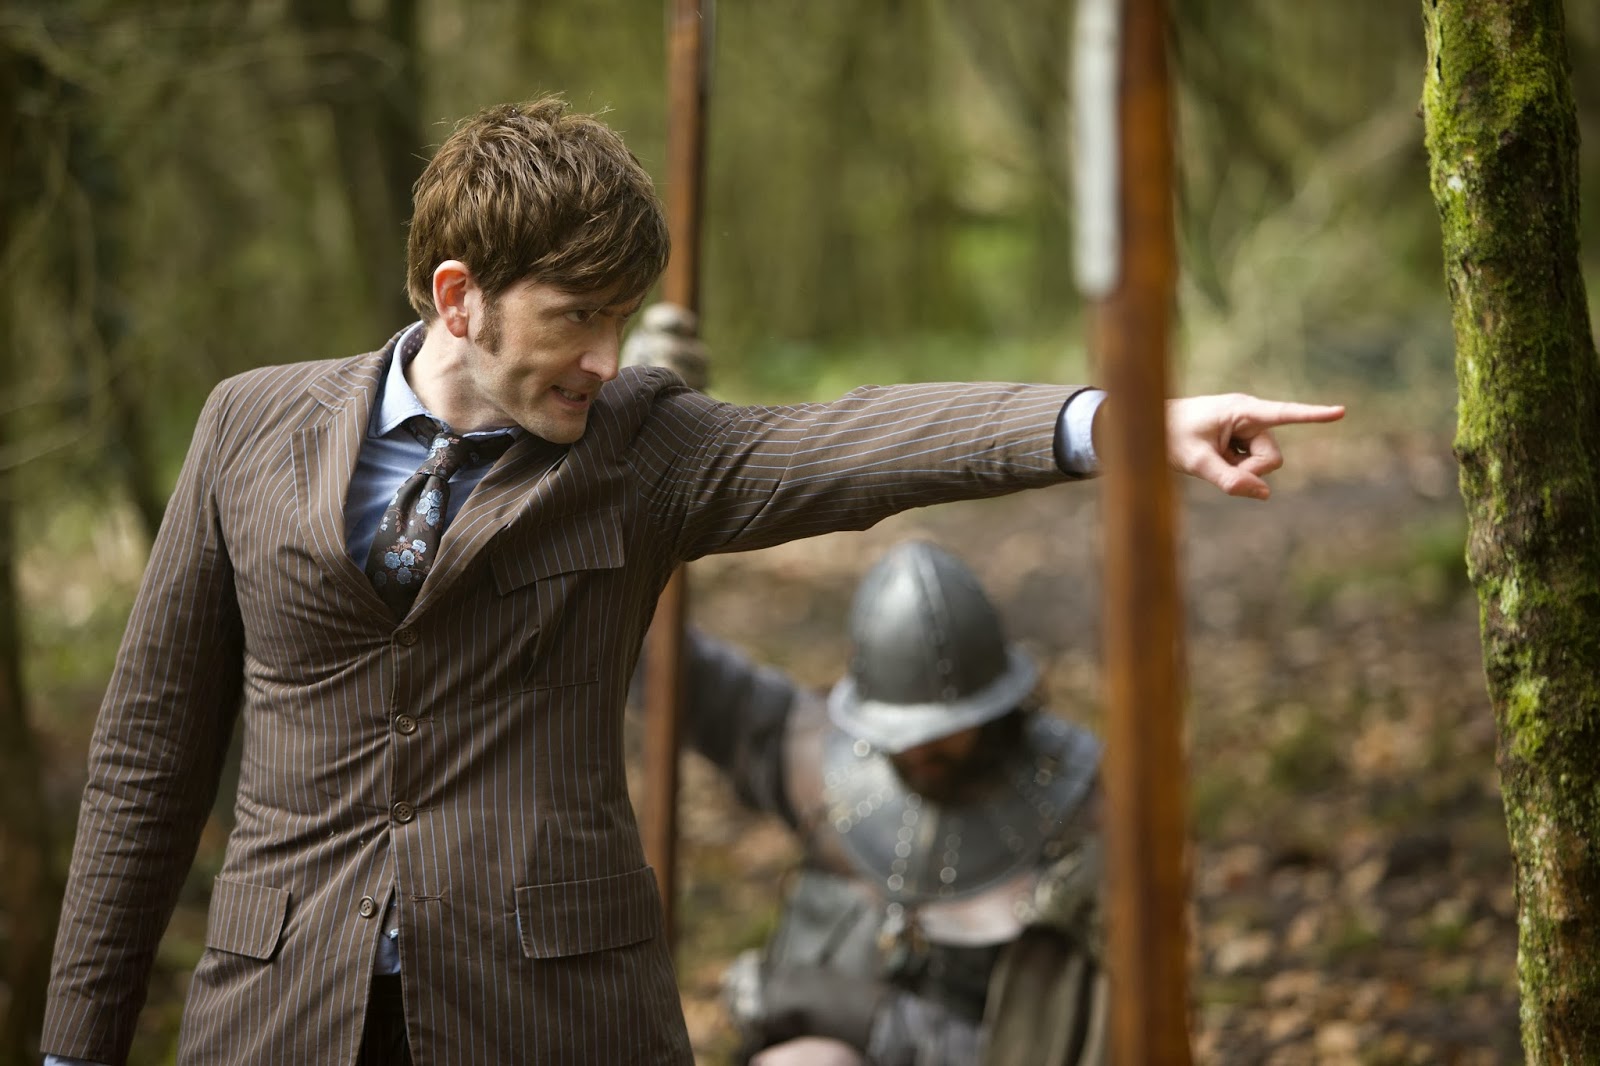 doctor who-50 aniversario-the day of the doctor-9-david tennant